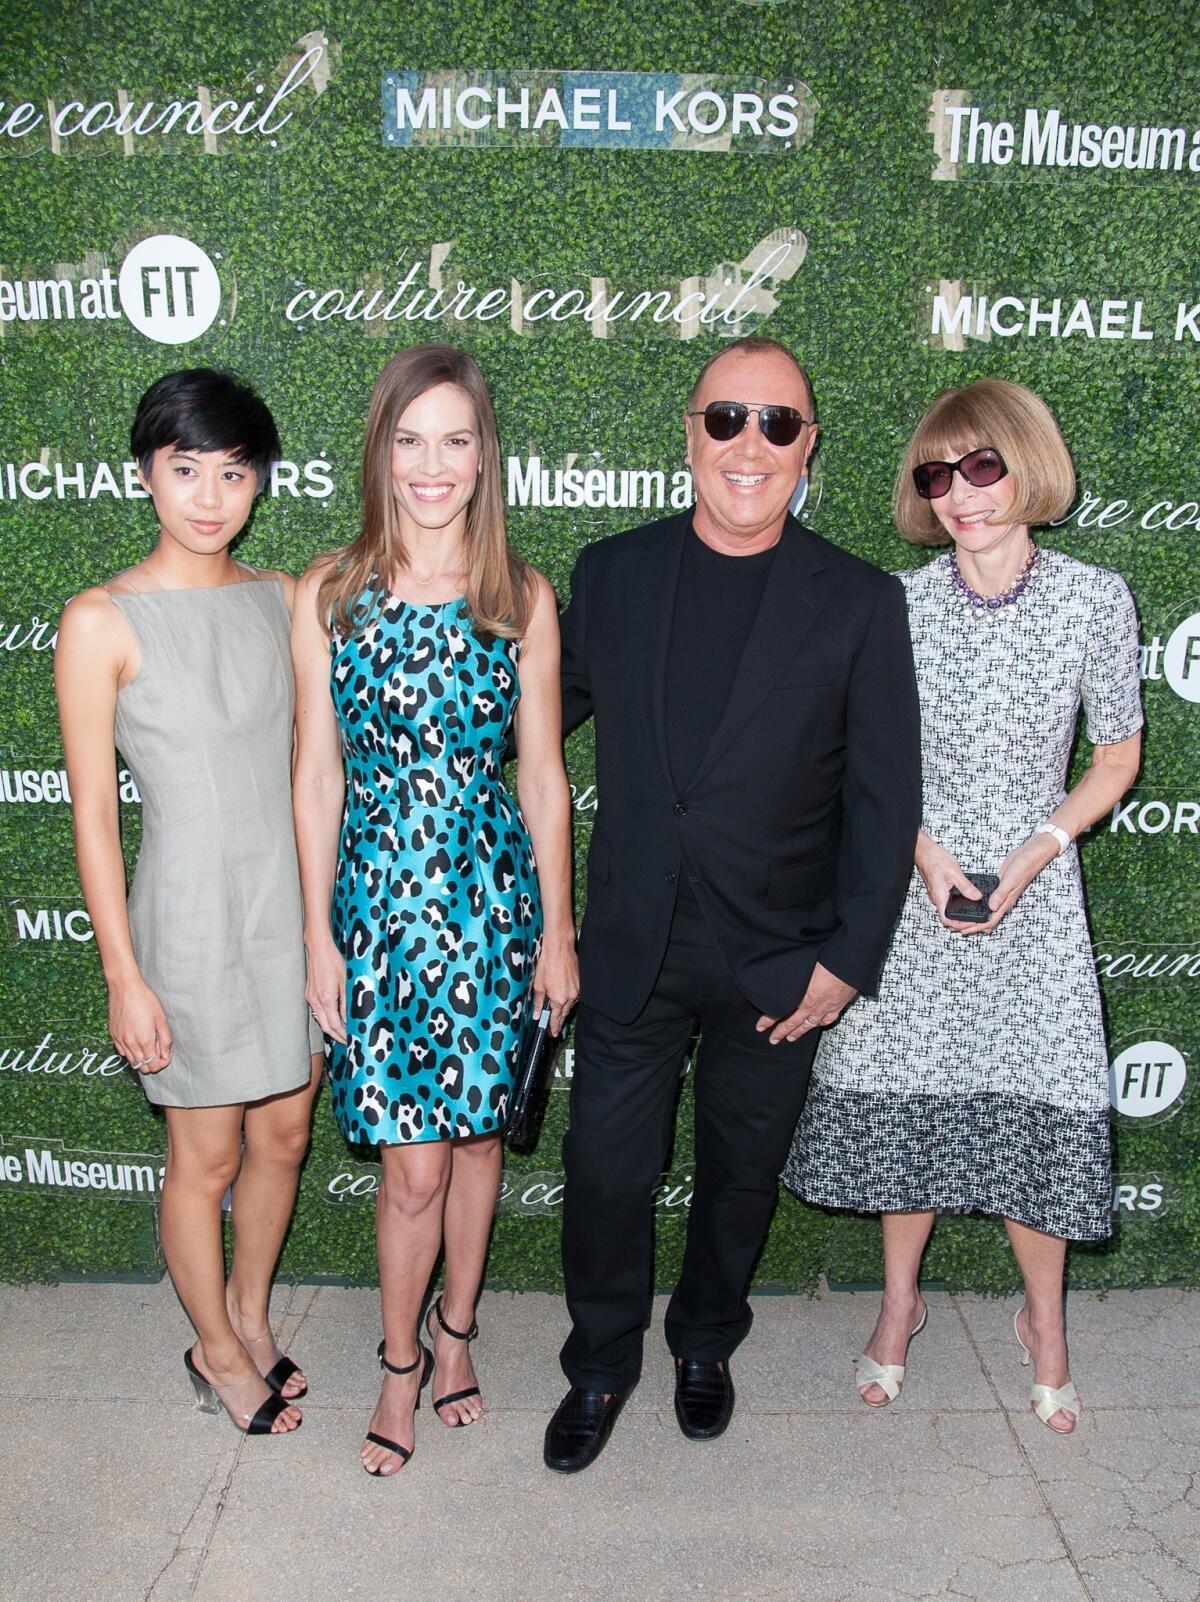 Kim Nguyen, left, Hilary Swank, Michael Kors and Vogue Editor-in-Chief Anna Wintour attend the 2013 Couture Council Fashion Visionary Awards on Wednesday.